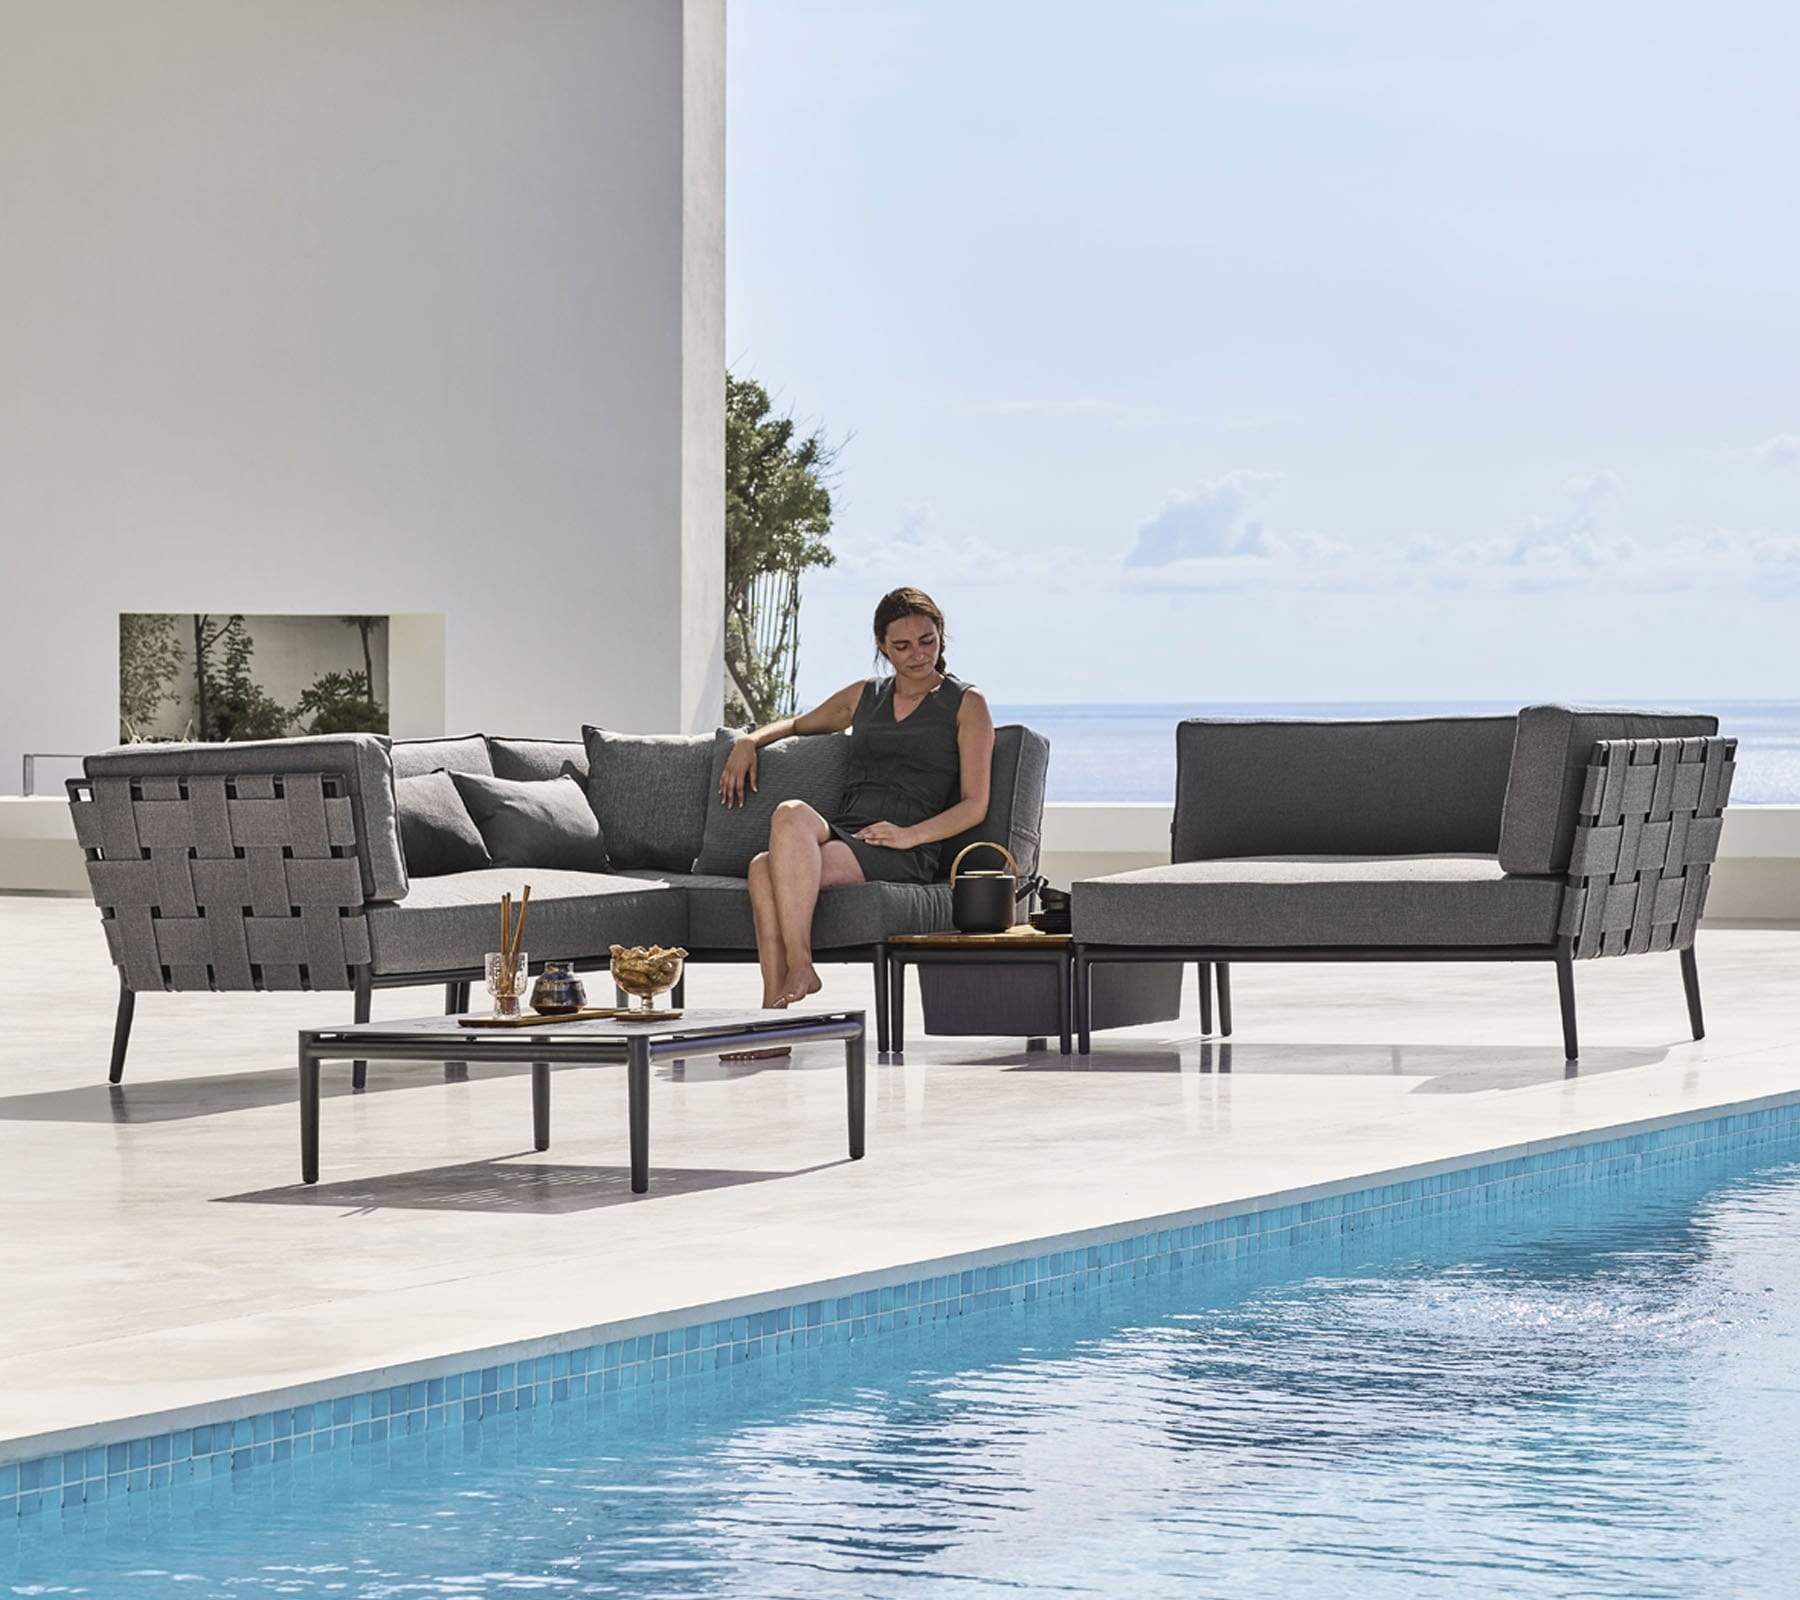 Boxhill's Conic Outdoor Coffee Table Grey lifestyle image with Conic Sectional Sofa and Conic Box Outdoor Storage Table with a woman sitting down